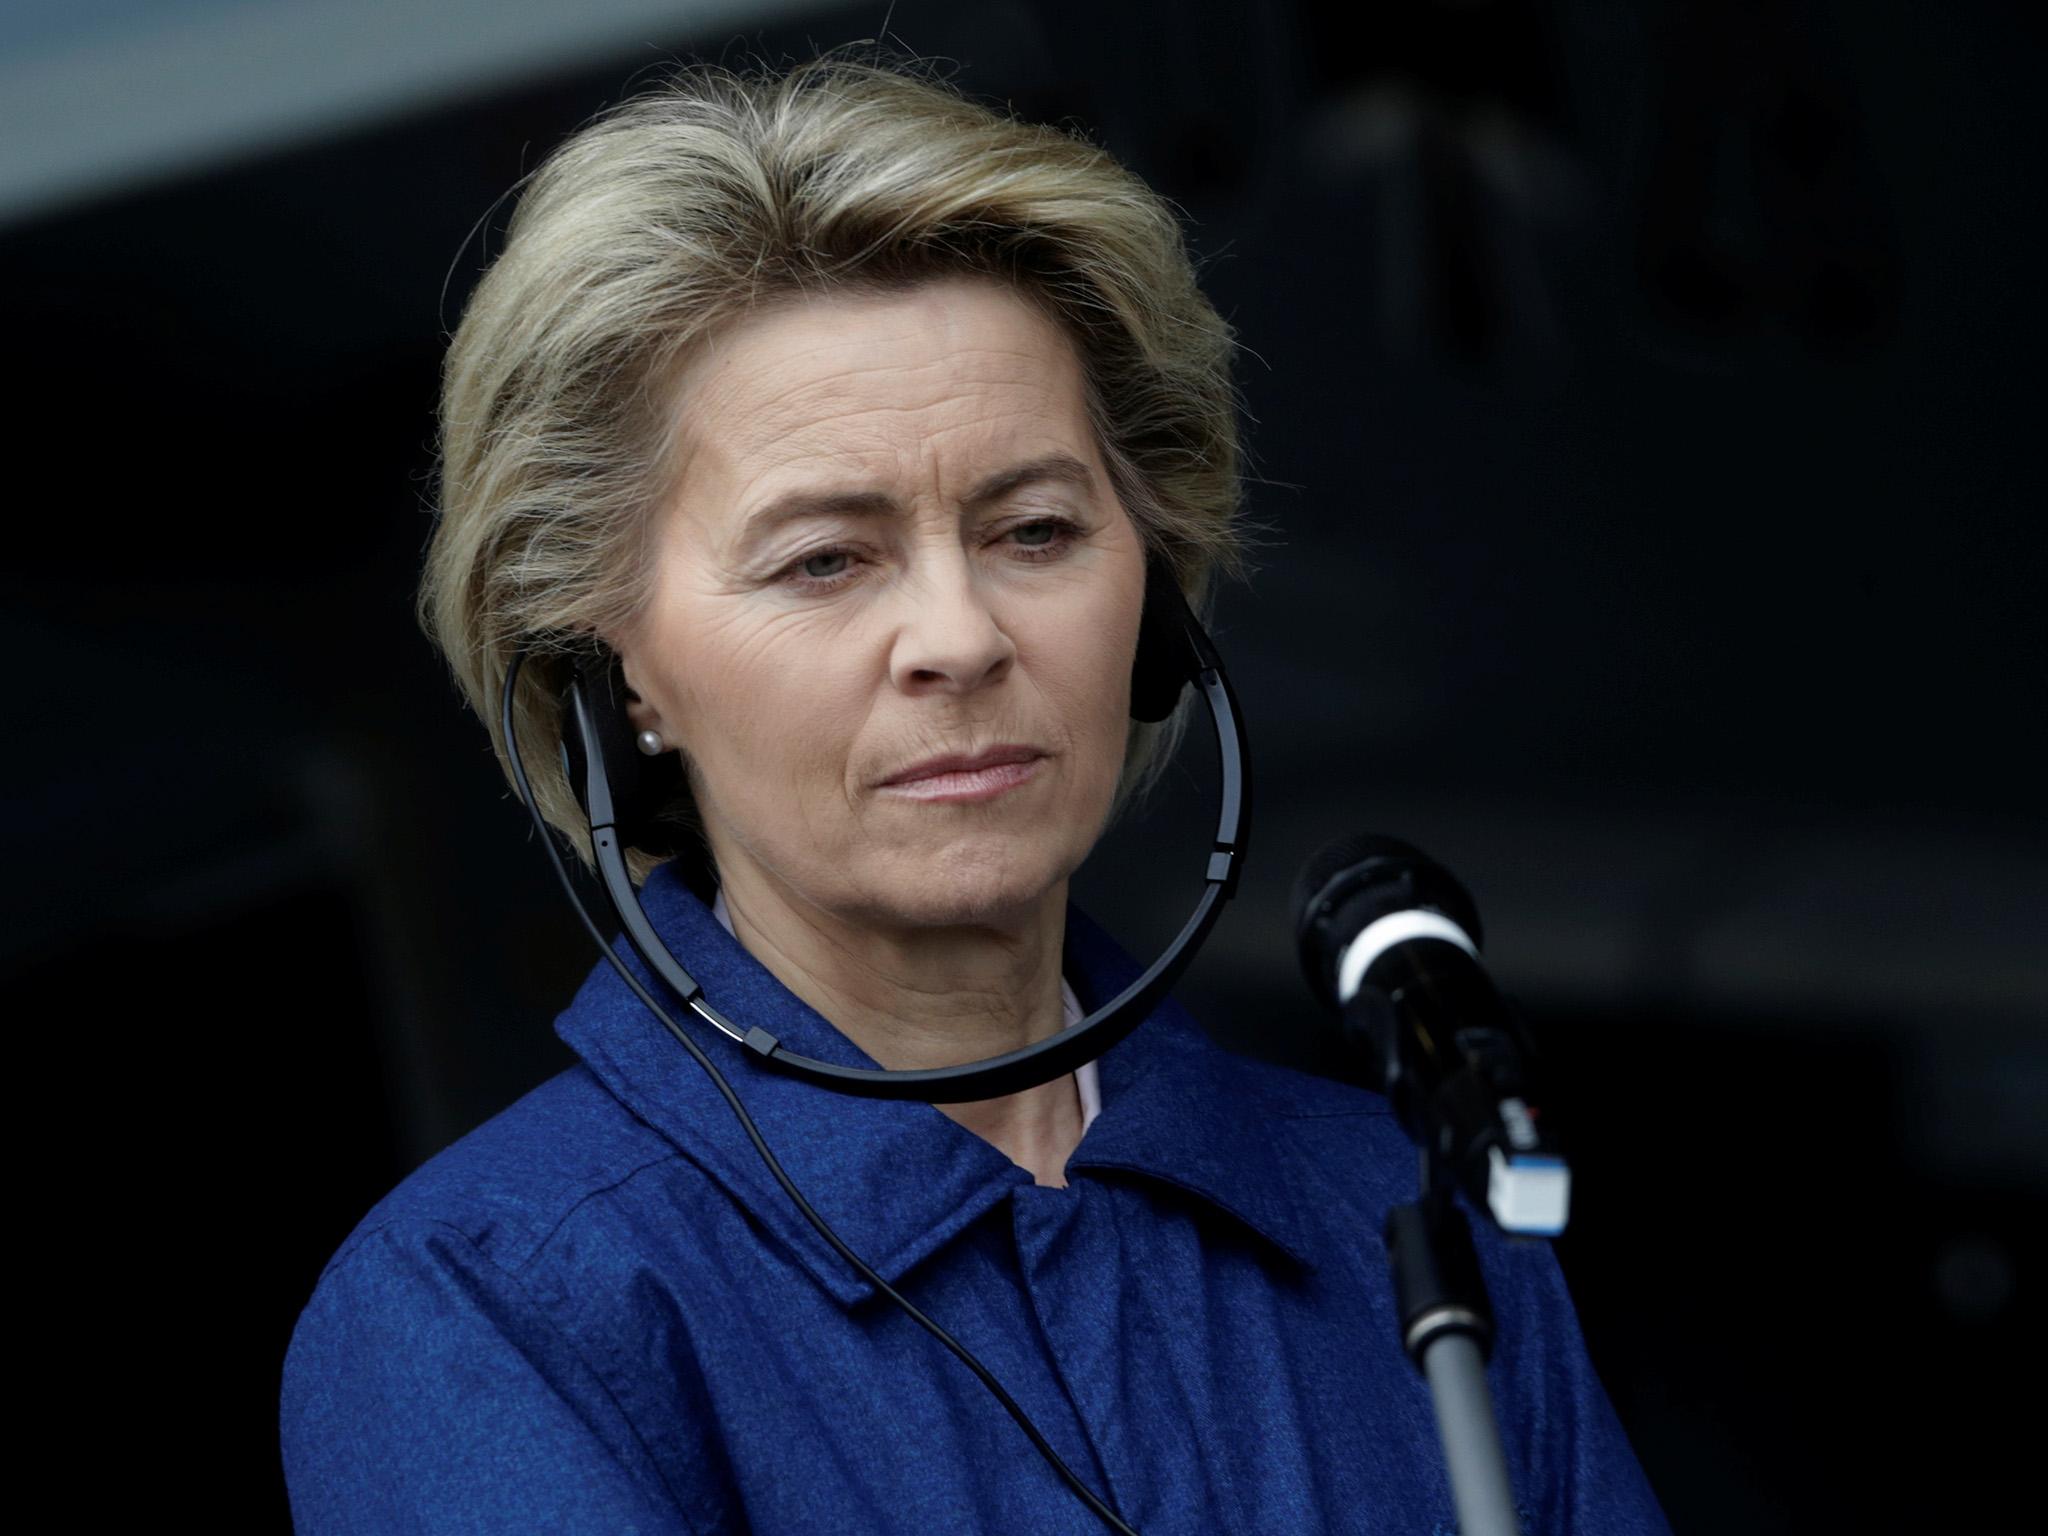 German Defence Minister Ursula von der Leyen refuted Mr Trump's claim that her country owes the US lots of money